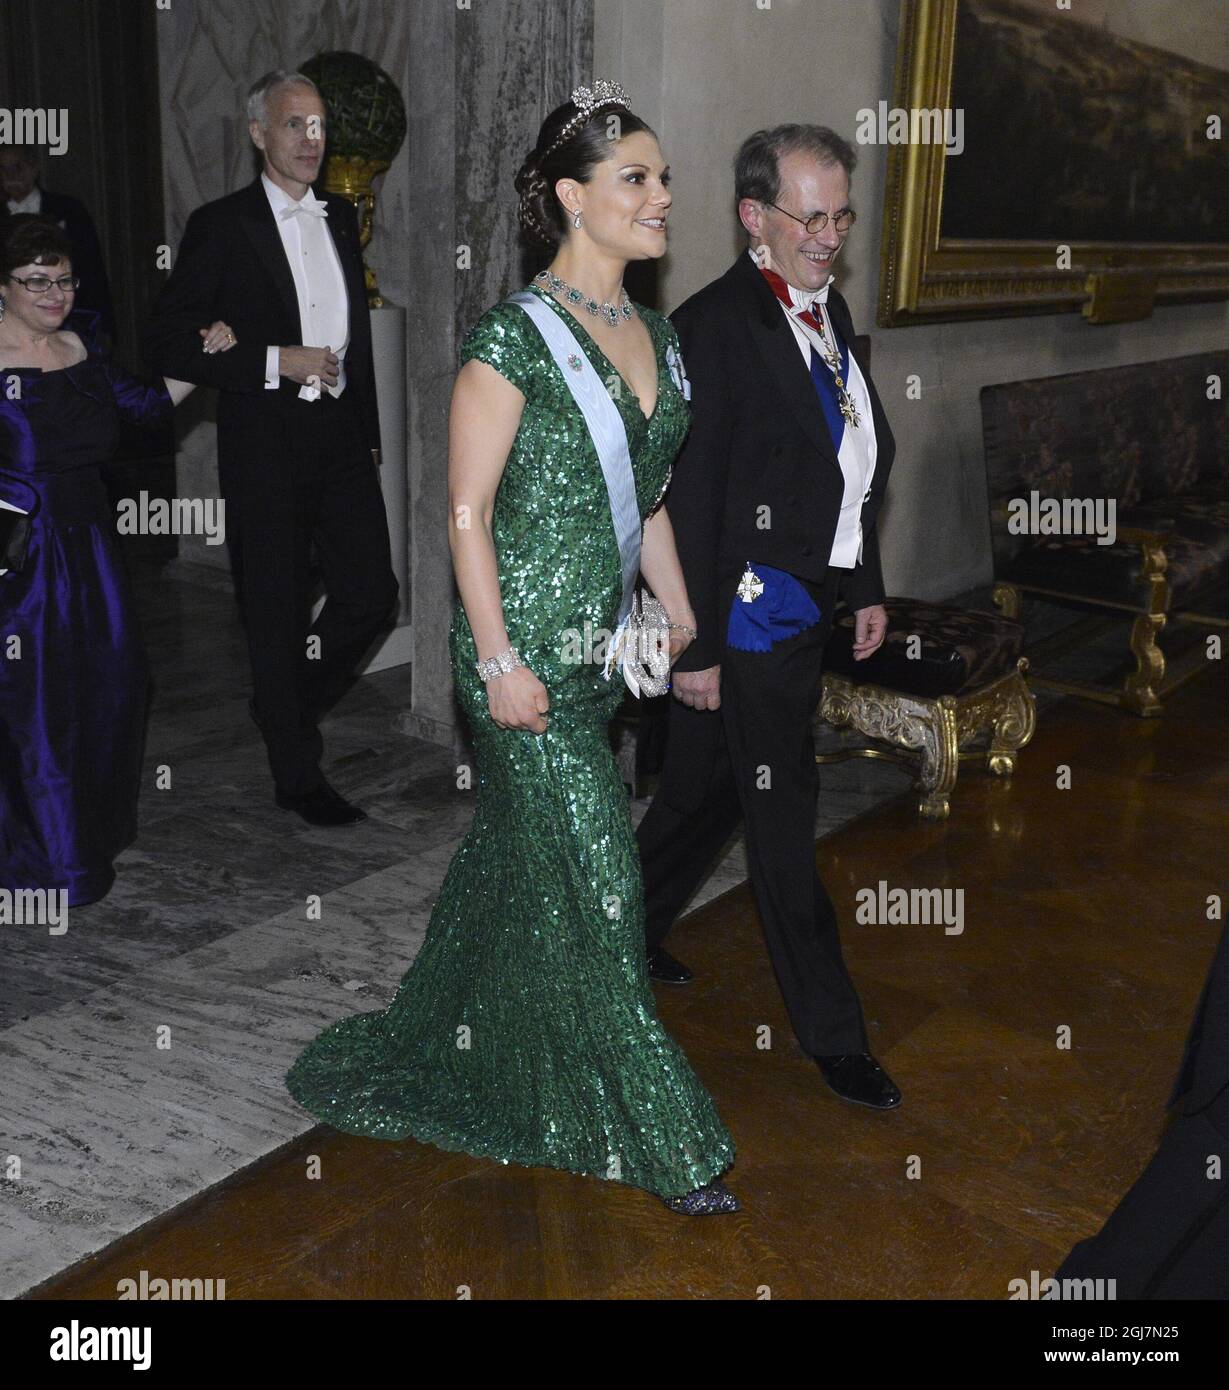 STOCKHOLM 2012-12-10 Crown Princess Victoria and Per Westerberg, Speaker of the House of Parliament at the Nobel Banquet in the City Hall in Stockholm Sweden, December 10, 2012. Photo Claudio Bresciani / SCANPIX code 10090   Stock Photo